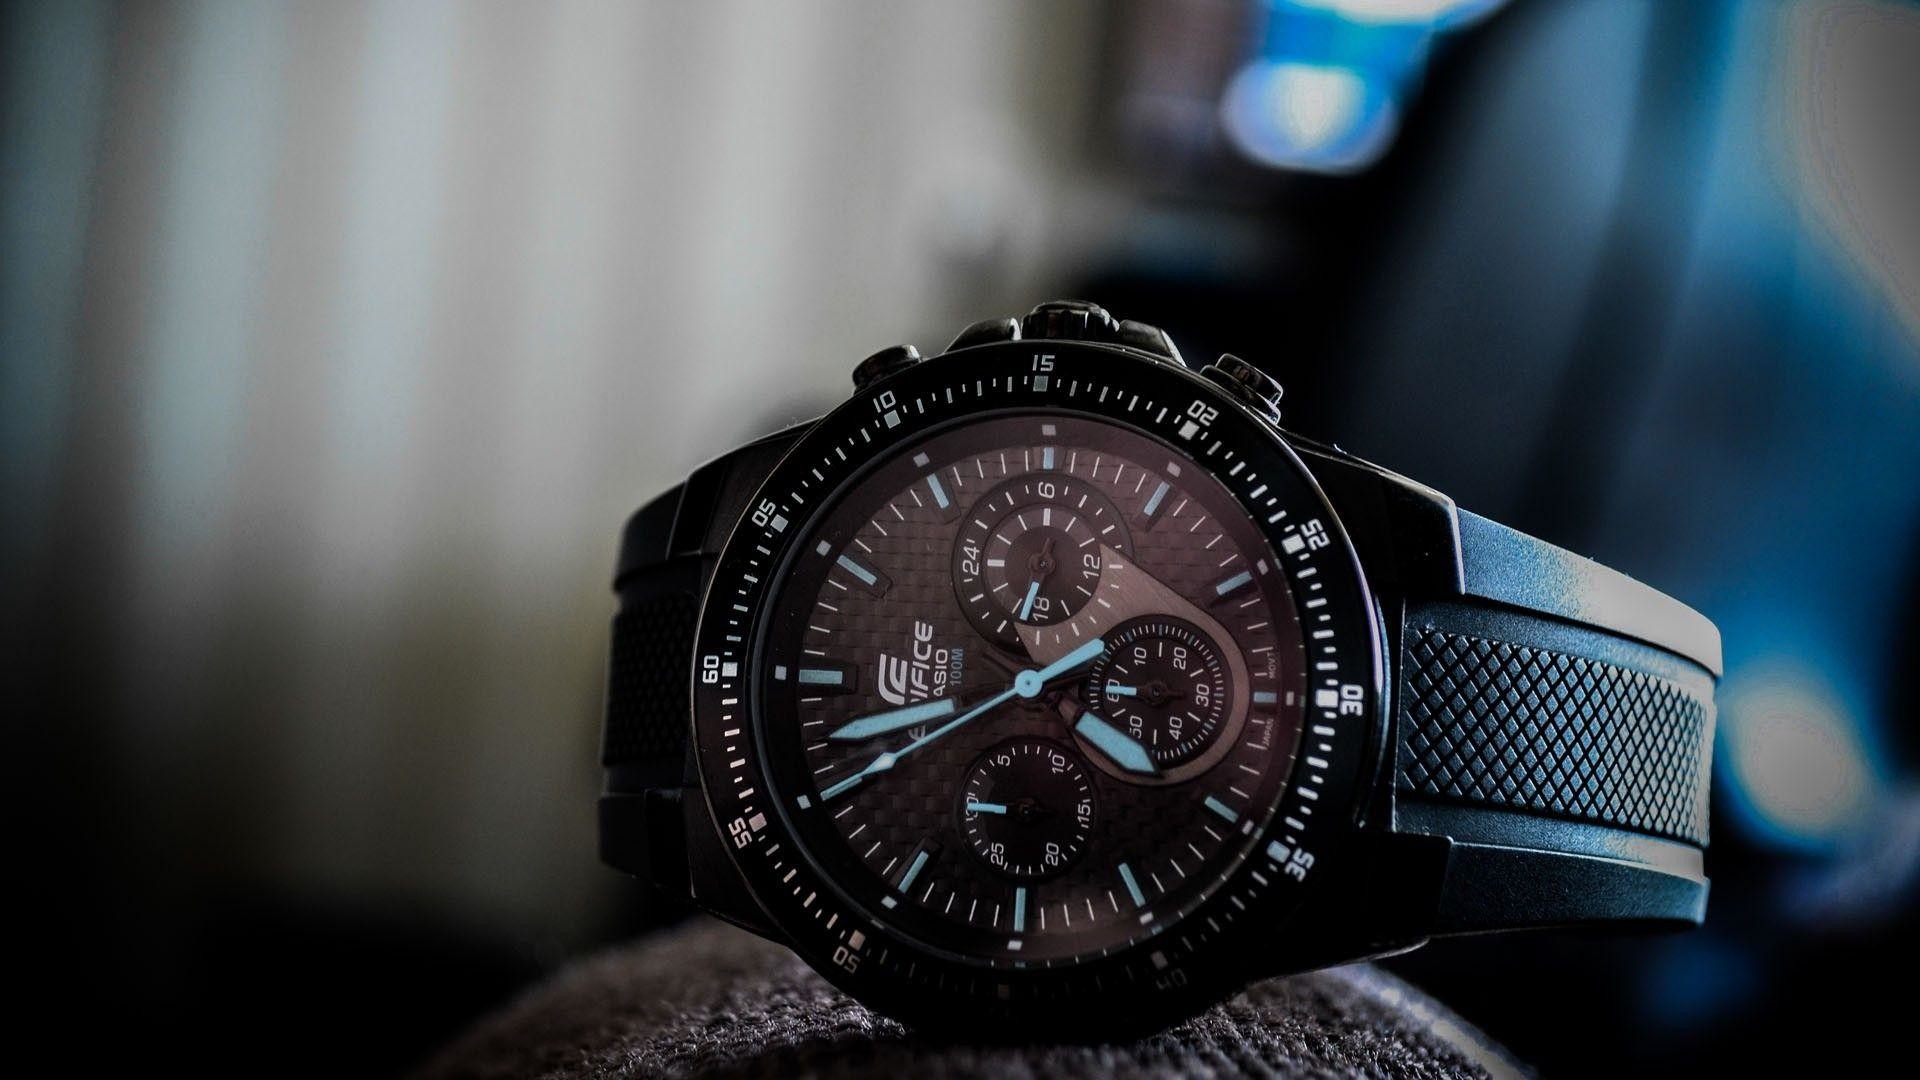 1920x1080 Watch company Casio wallpapers and images - wallpapers, pictures .